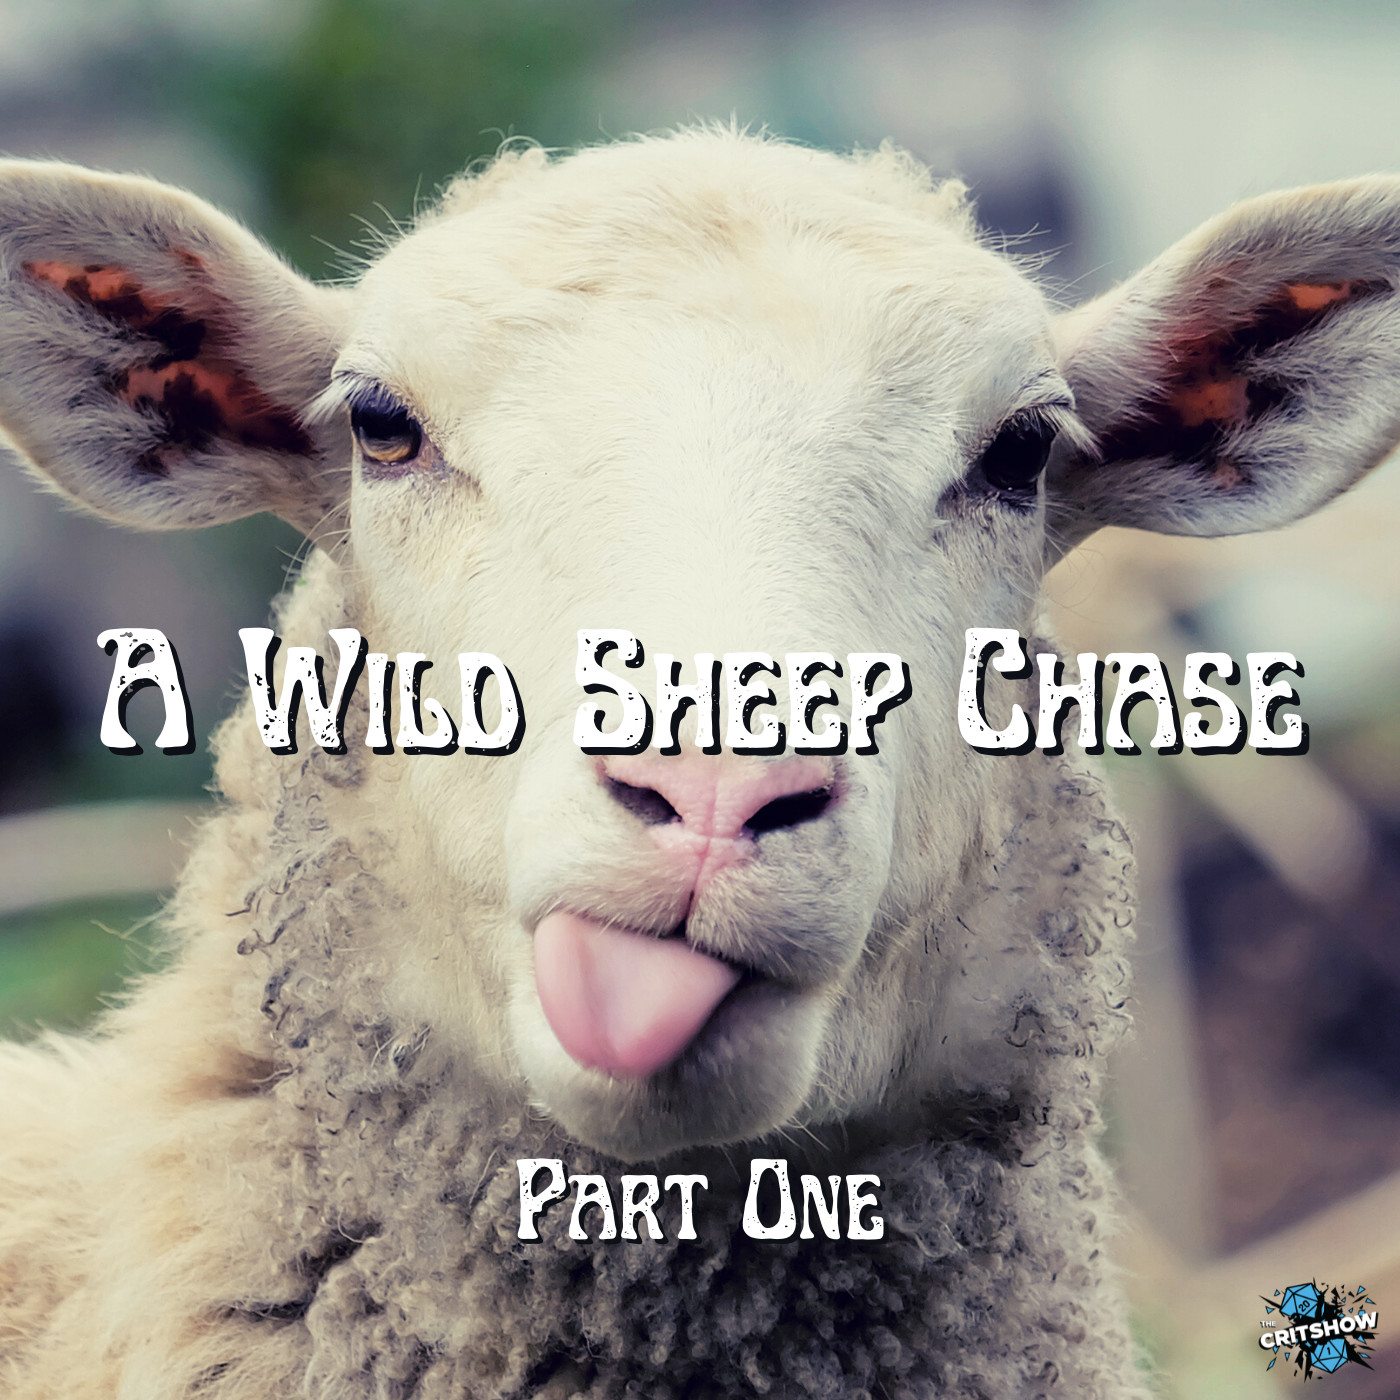 a wild sheep chase series